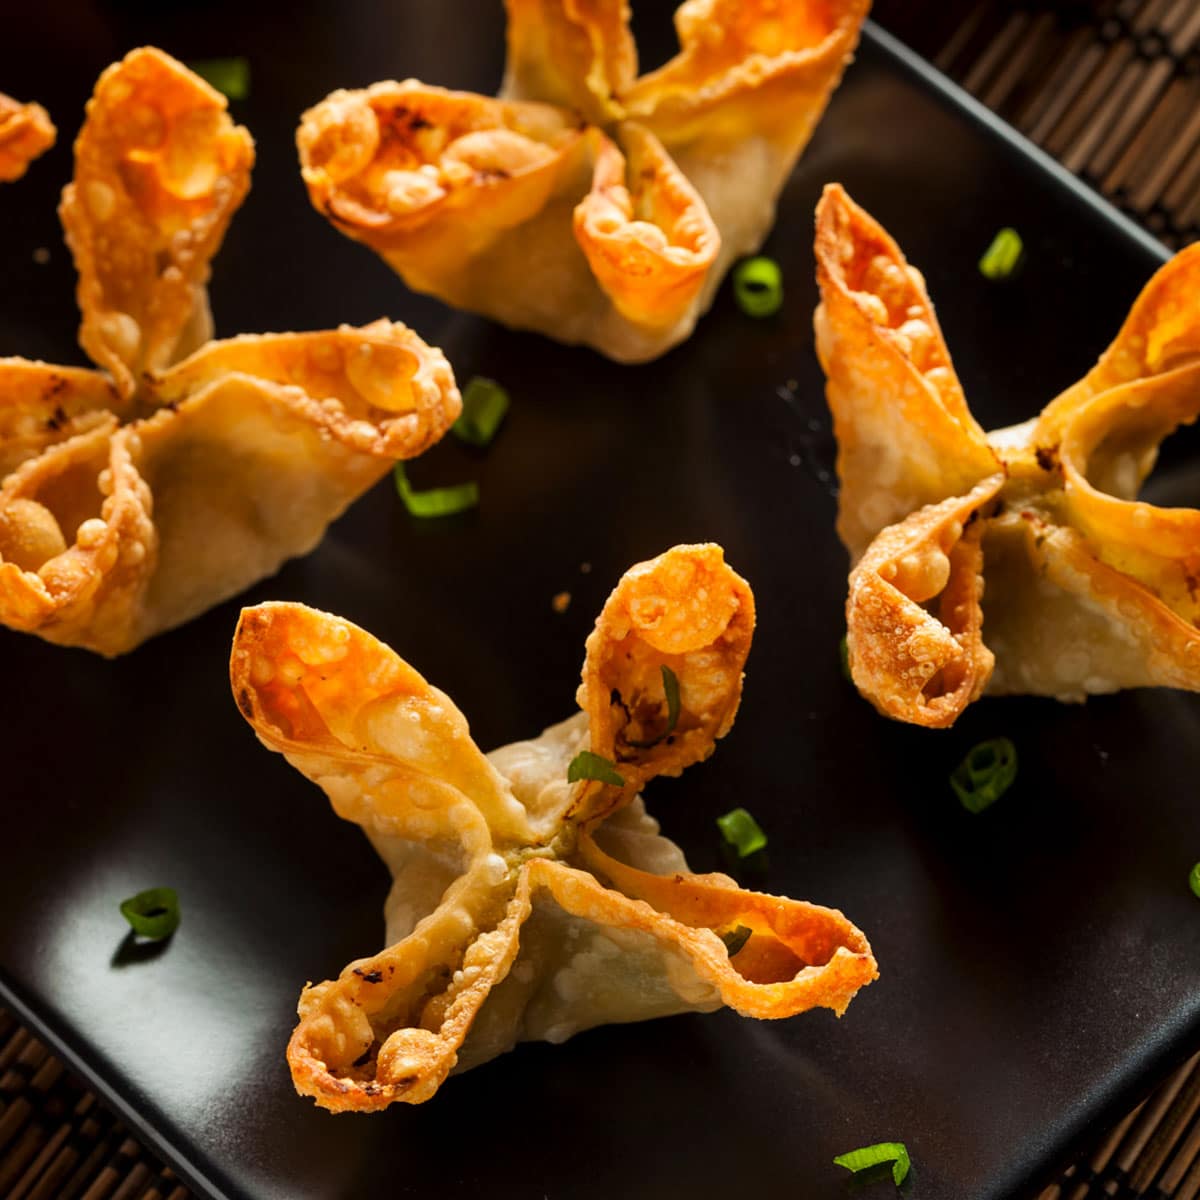 This guide will explore different methods of reheating crab rangoon to ensure you get the perfect texture and flavor every time. Whether you're reheating it in the oven, microwave, stovetop, or air fryer, we'll share tips and tricks to help you achieve the best result.